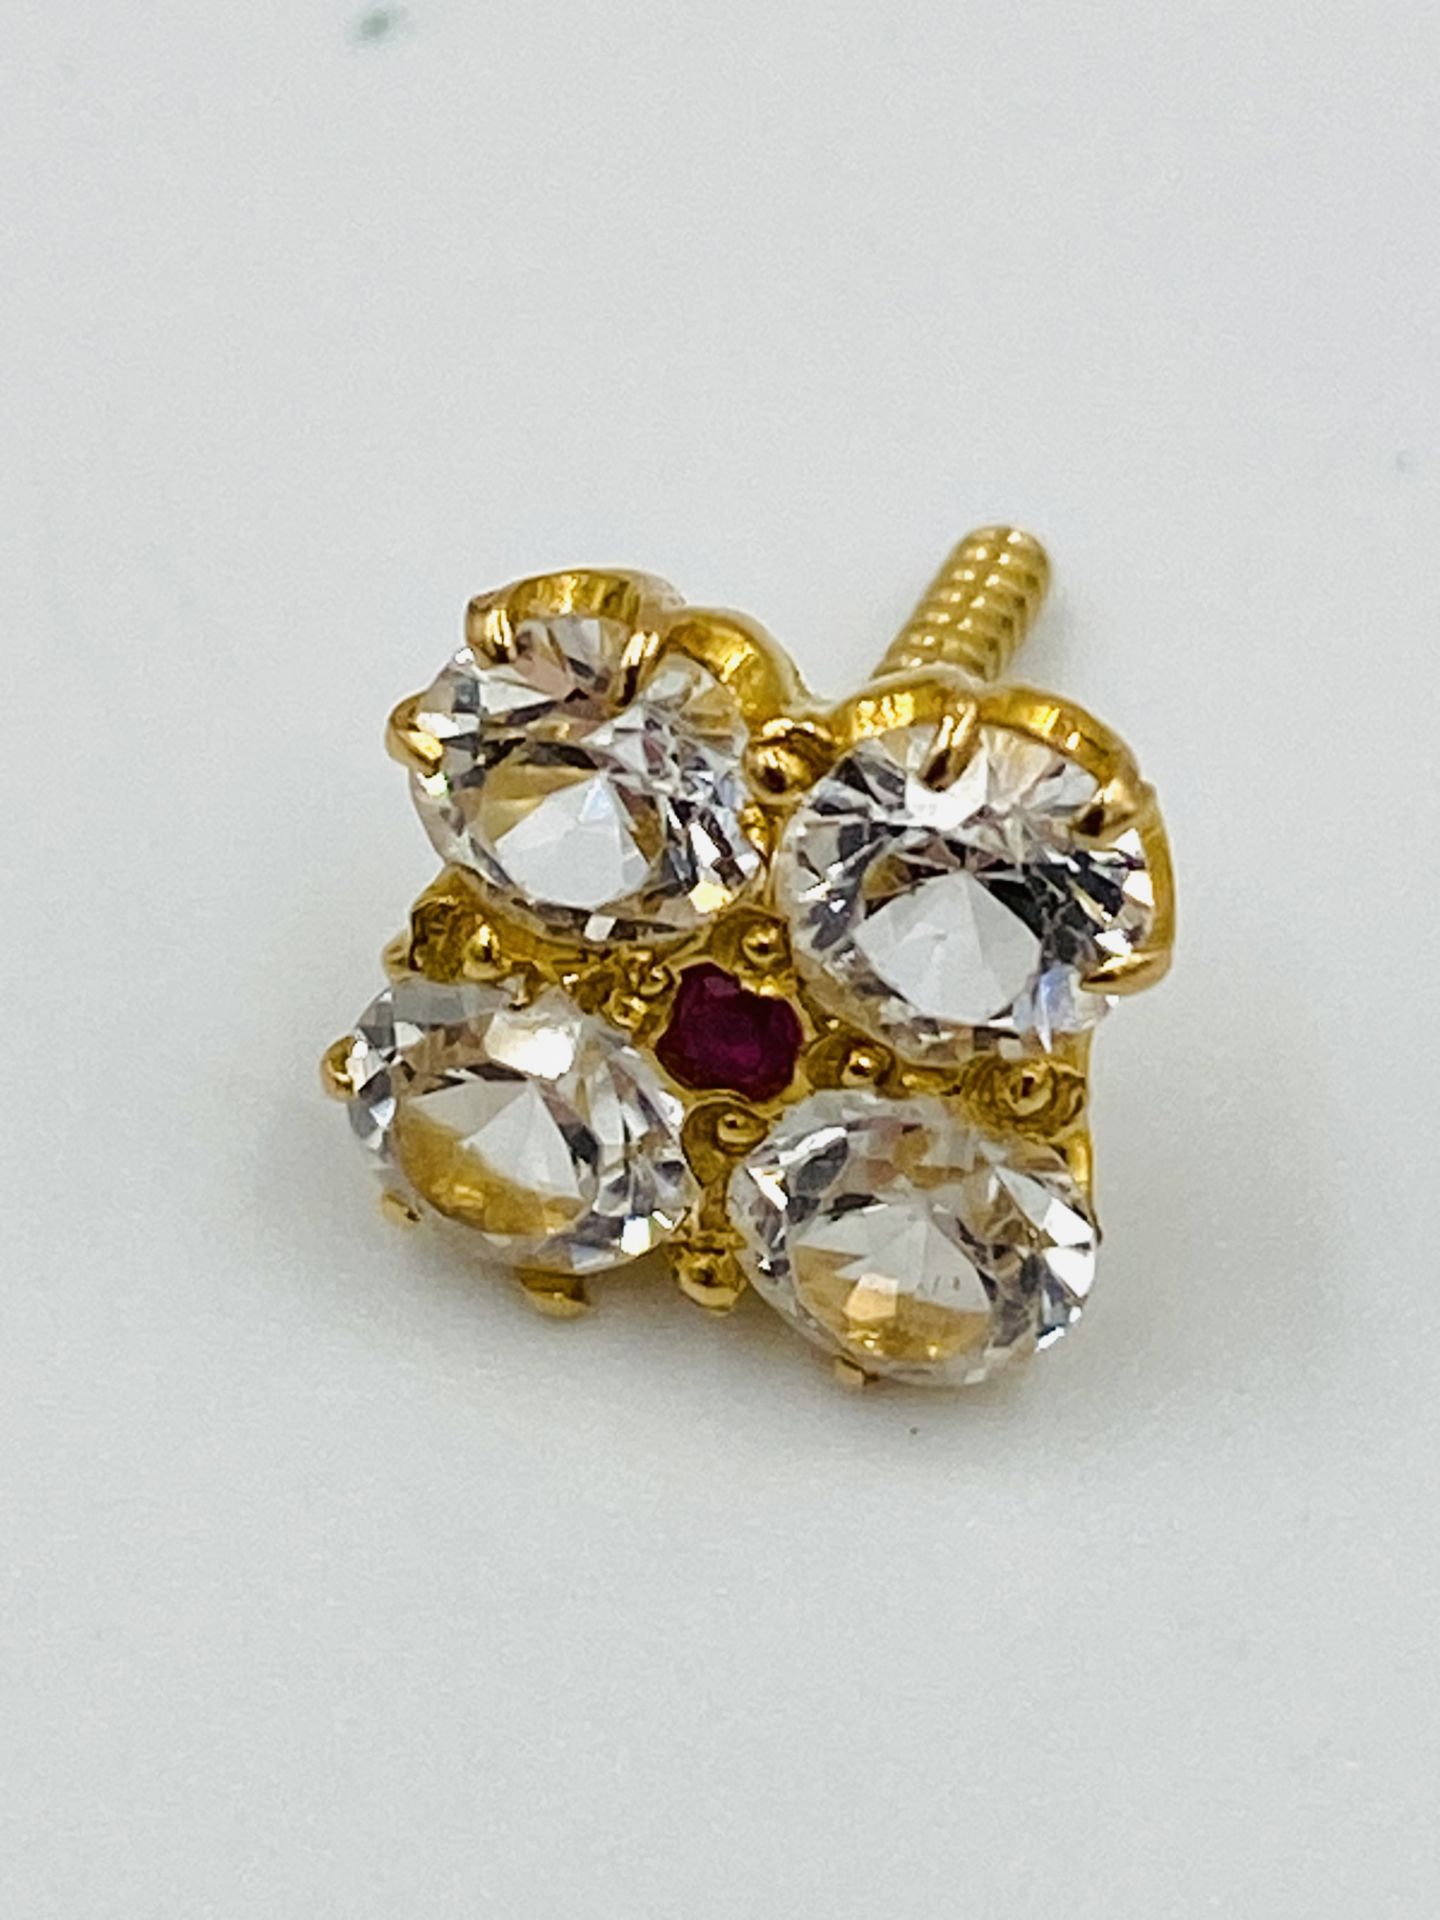 Pair of 9ct gold, sapphire and ruby earrings - Image 2 of 4